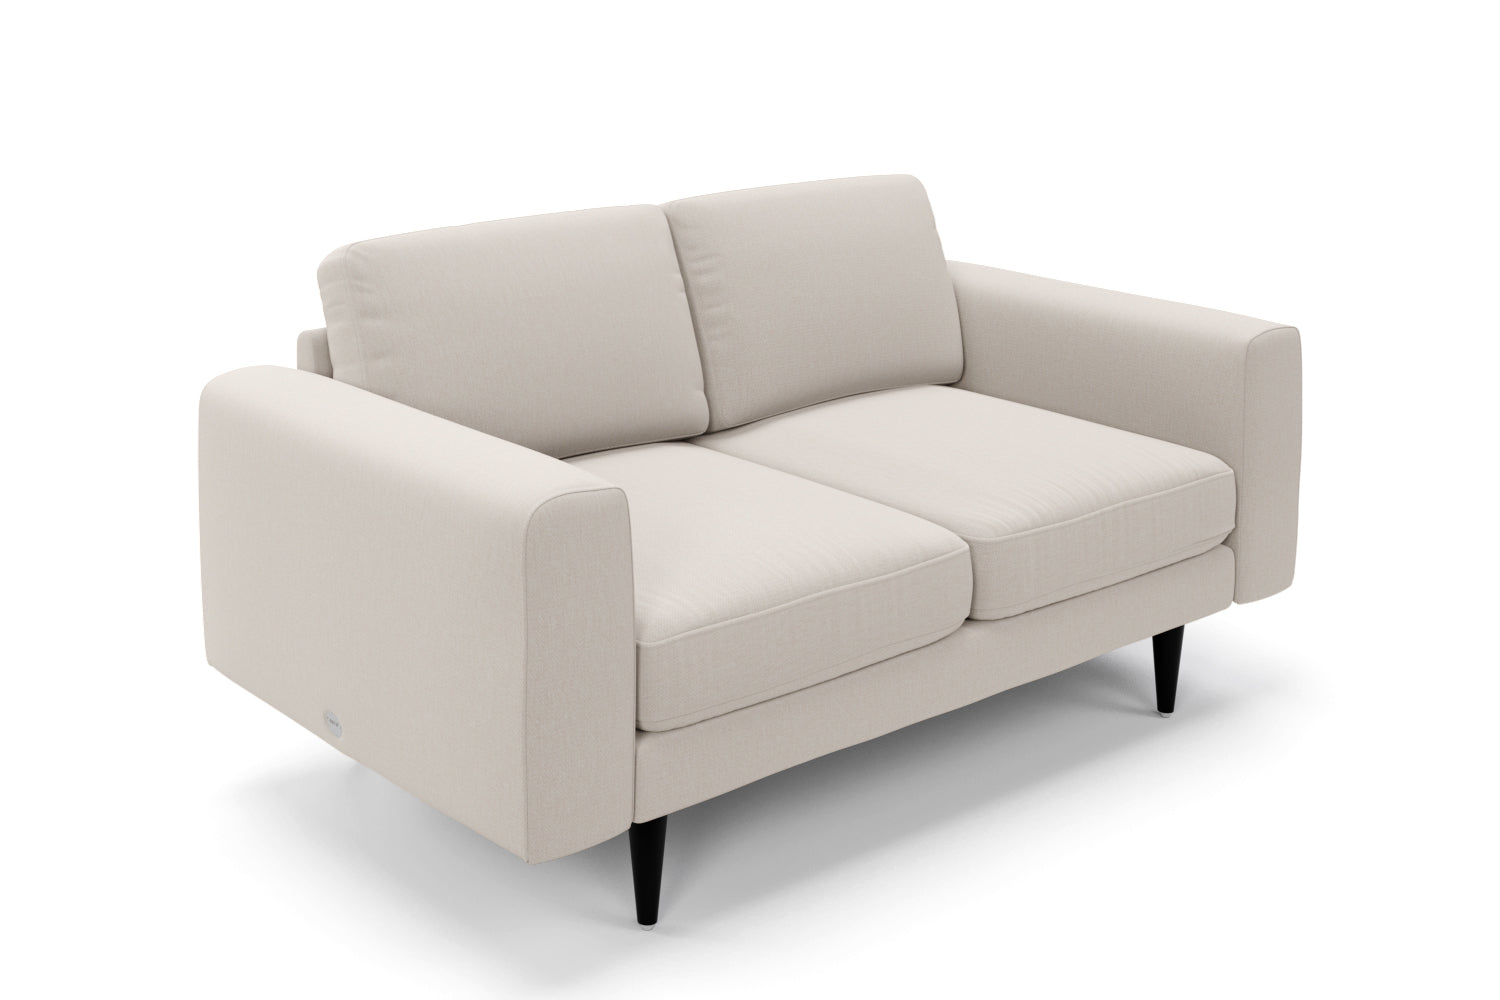 SNUG | The Big Chill 2 Seater Sofa in Biscuit